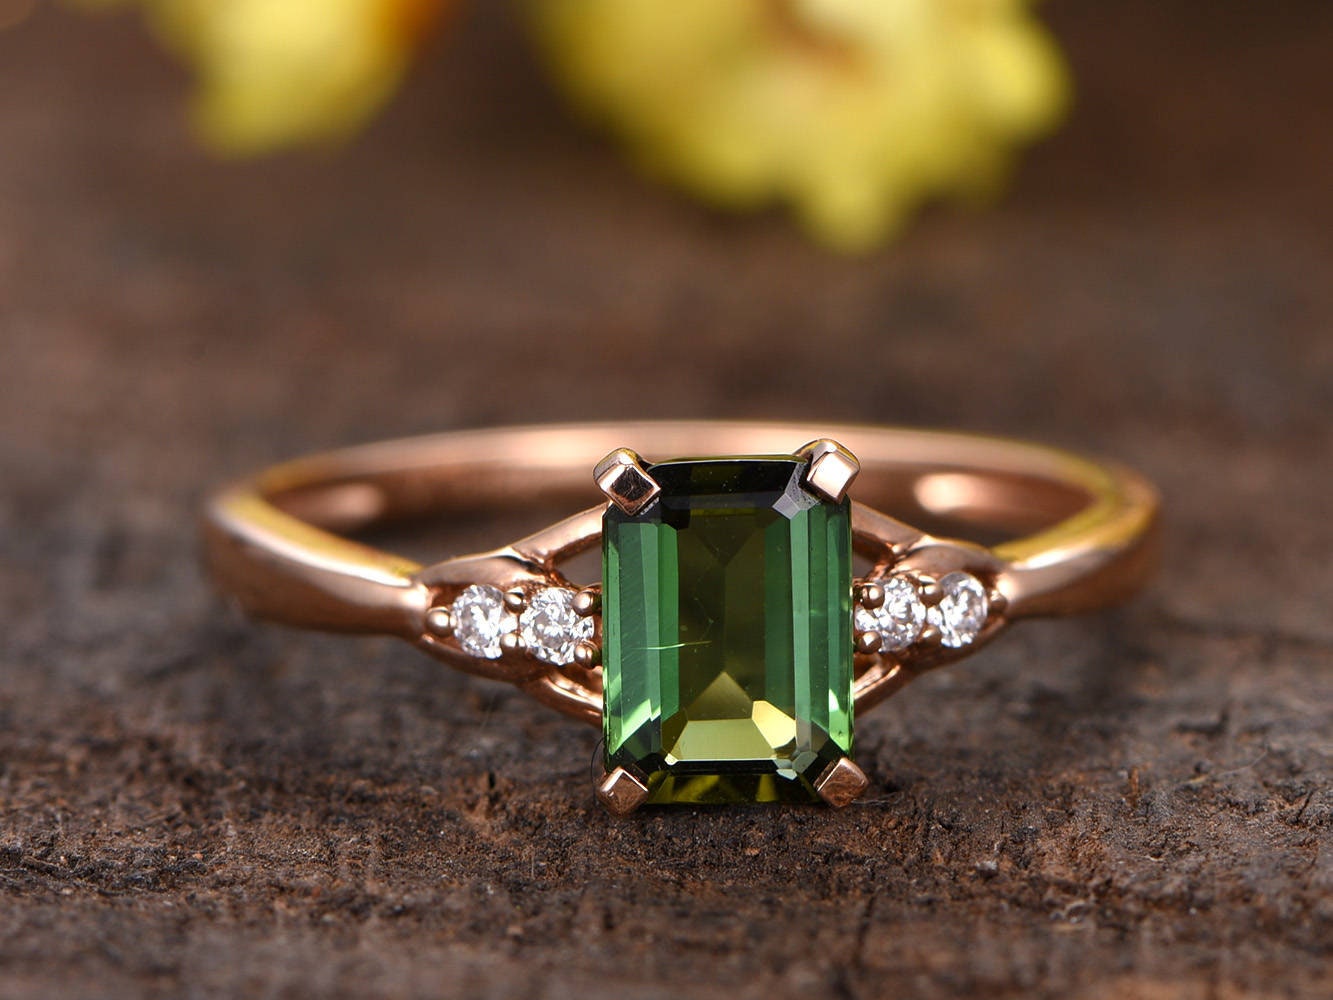 Buy Natural Green Tourmaline Ring/18k Gold Oval Cut Tourmaline Ring/unique  Handmade Tourmaline Ring/vintage Tourmaline Engagement Ring Online in India  - Etsy